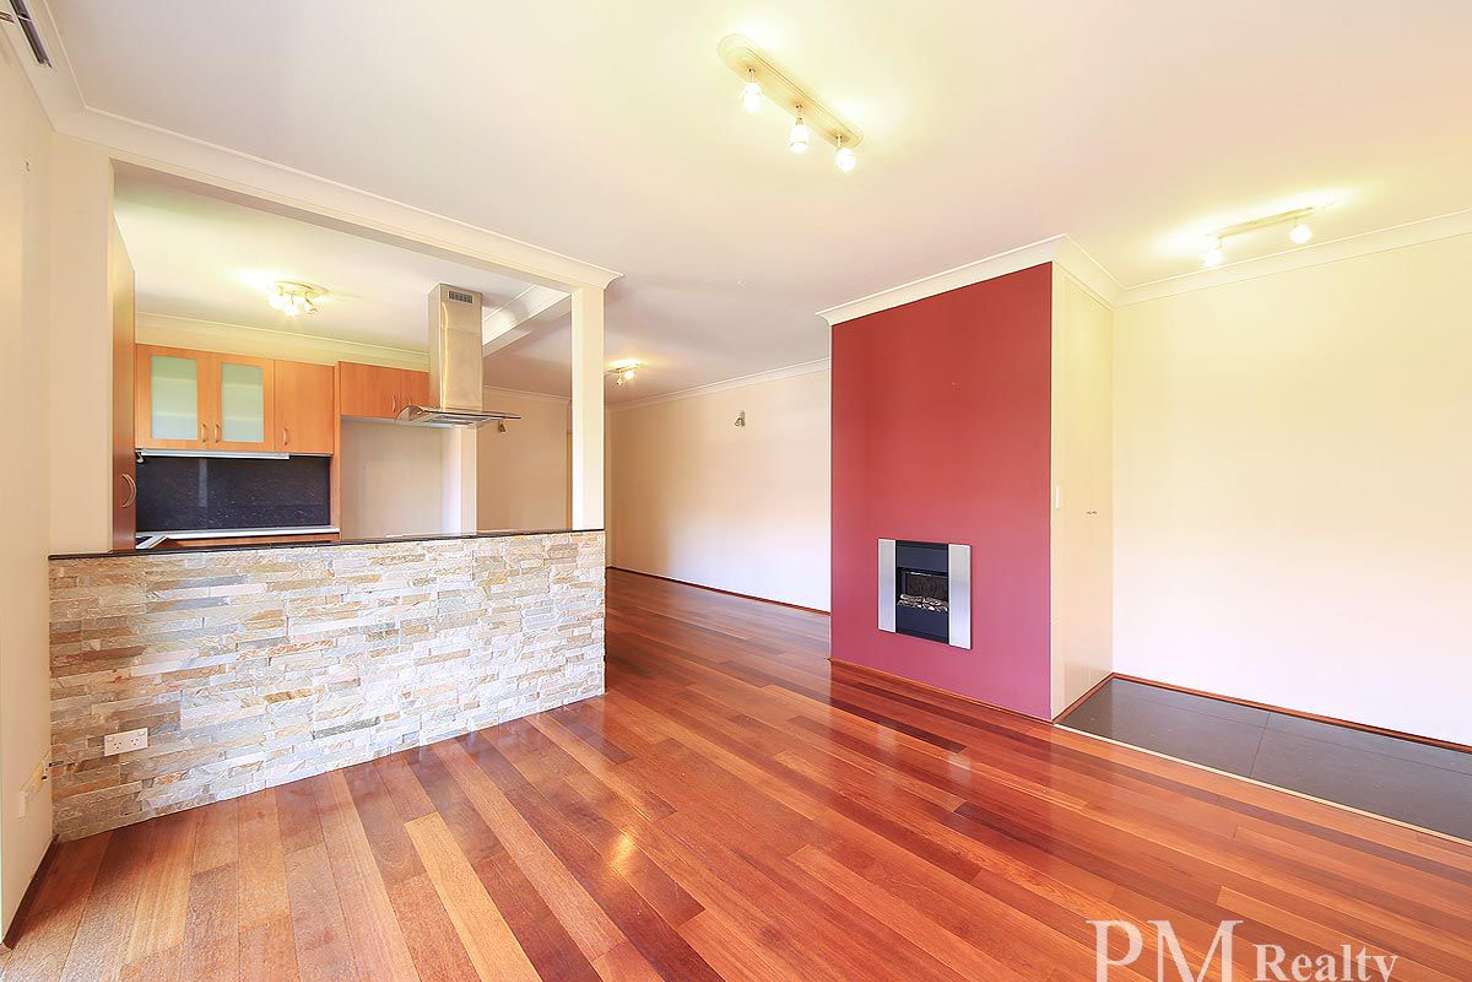 Main view of Homely apartment listing, 20/43 Victoria Road, Parramatta NSW 2150